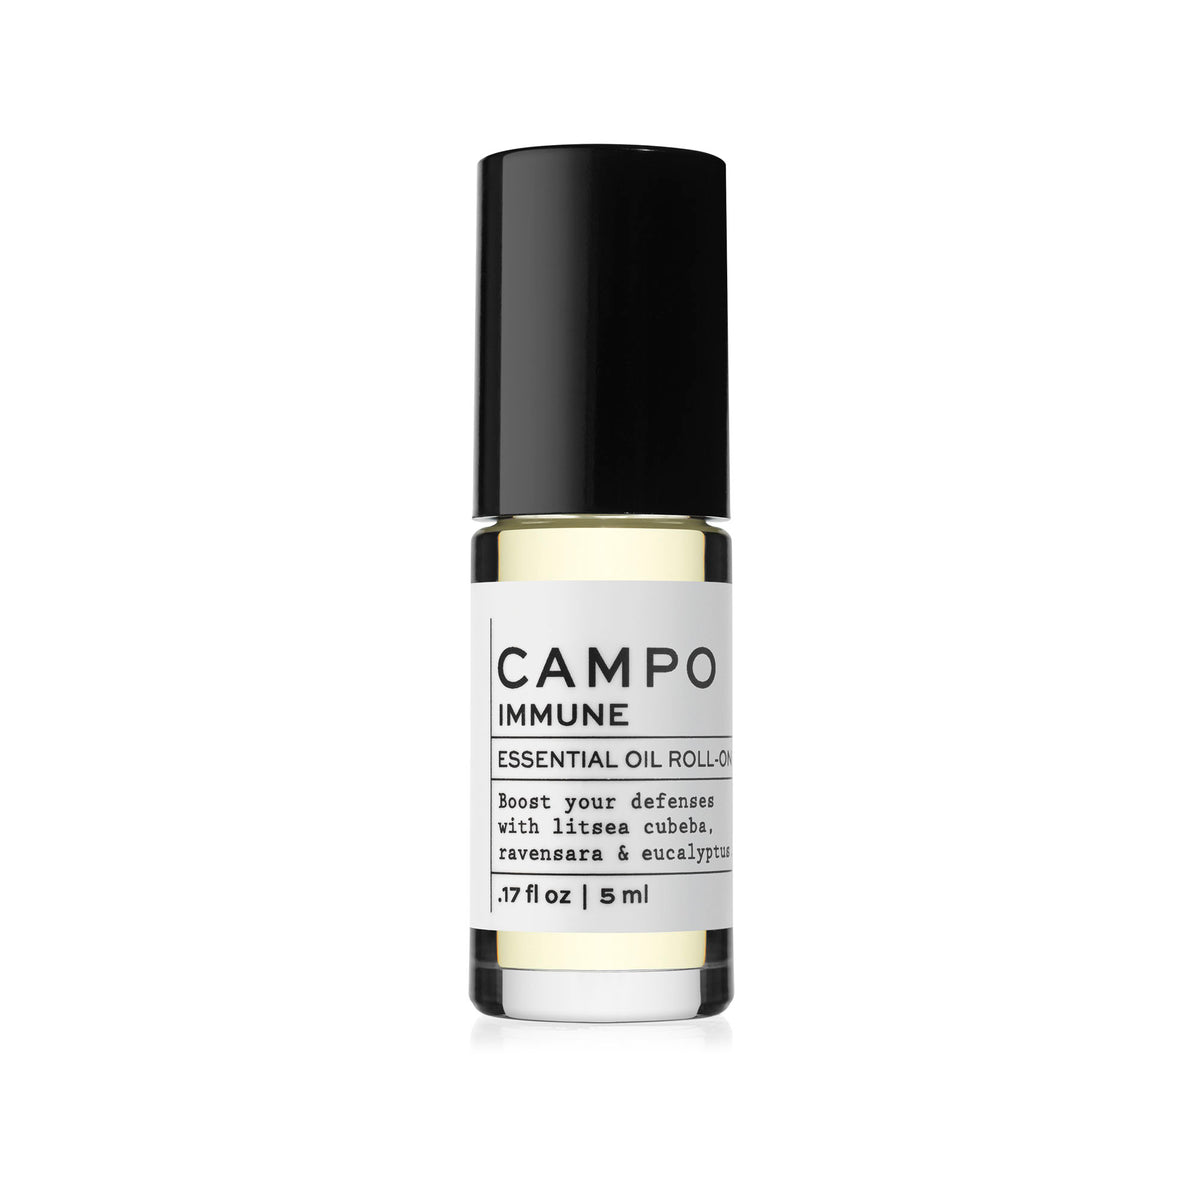 Campo Beauty Essential Oil IMMUNE Blend Roll-On that in 5 ml. Boost your defenses naturally. Help support your body’s natural defenses with this 100% natural essential oil roll-on blend of Litsea Cubeba, Ravensara &amp; Eucalyptus. Pre-blended with 100% natural beauty carrier oils. Jet set and ready to roll.